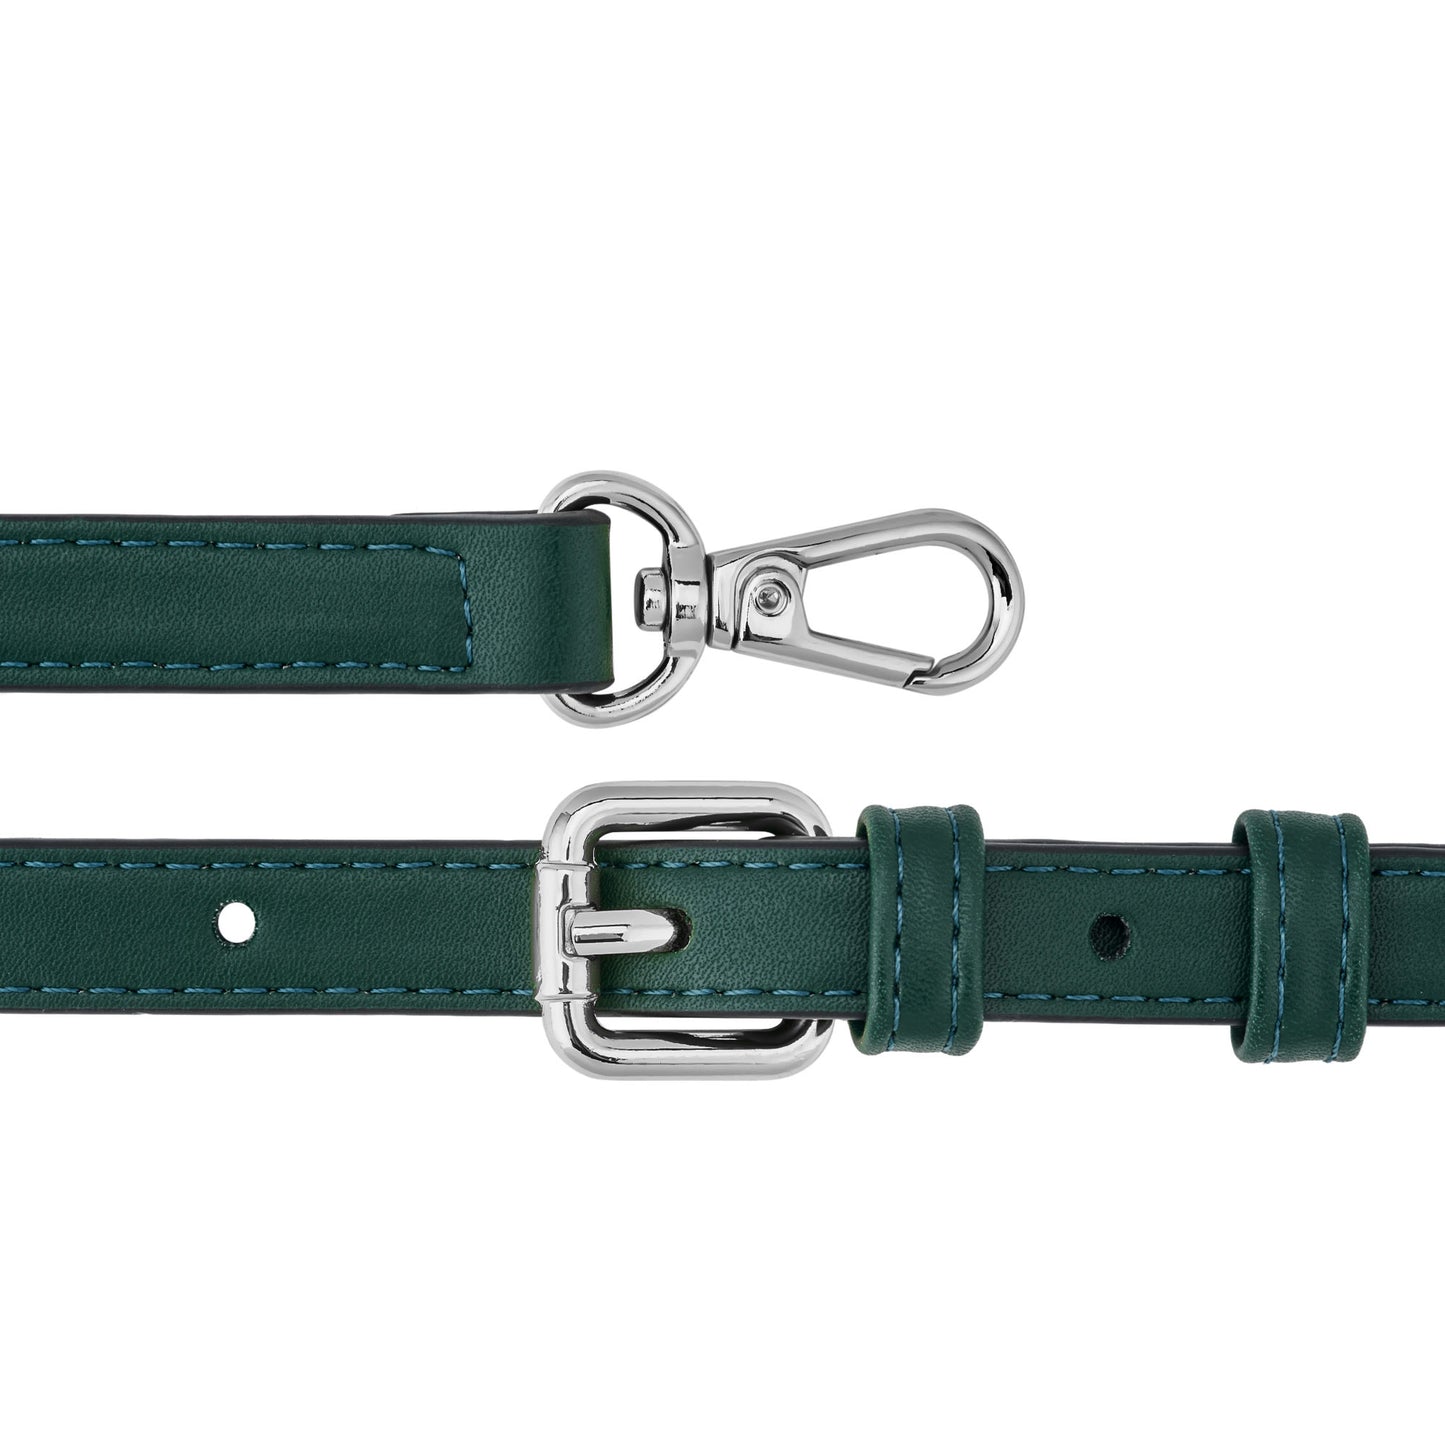 Purse Strap Universal Adjustable with No Punching Buckle Bag Shoulder Strap Cross  Body Strap for Small Bag Briefcase Purse DIY Modification Green 